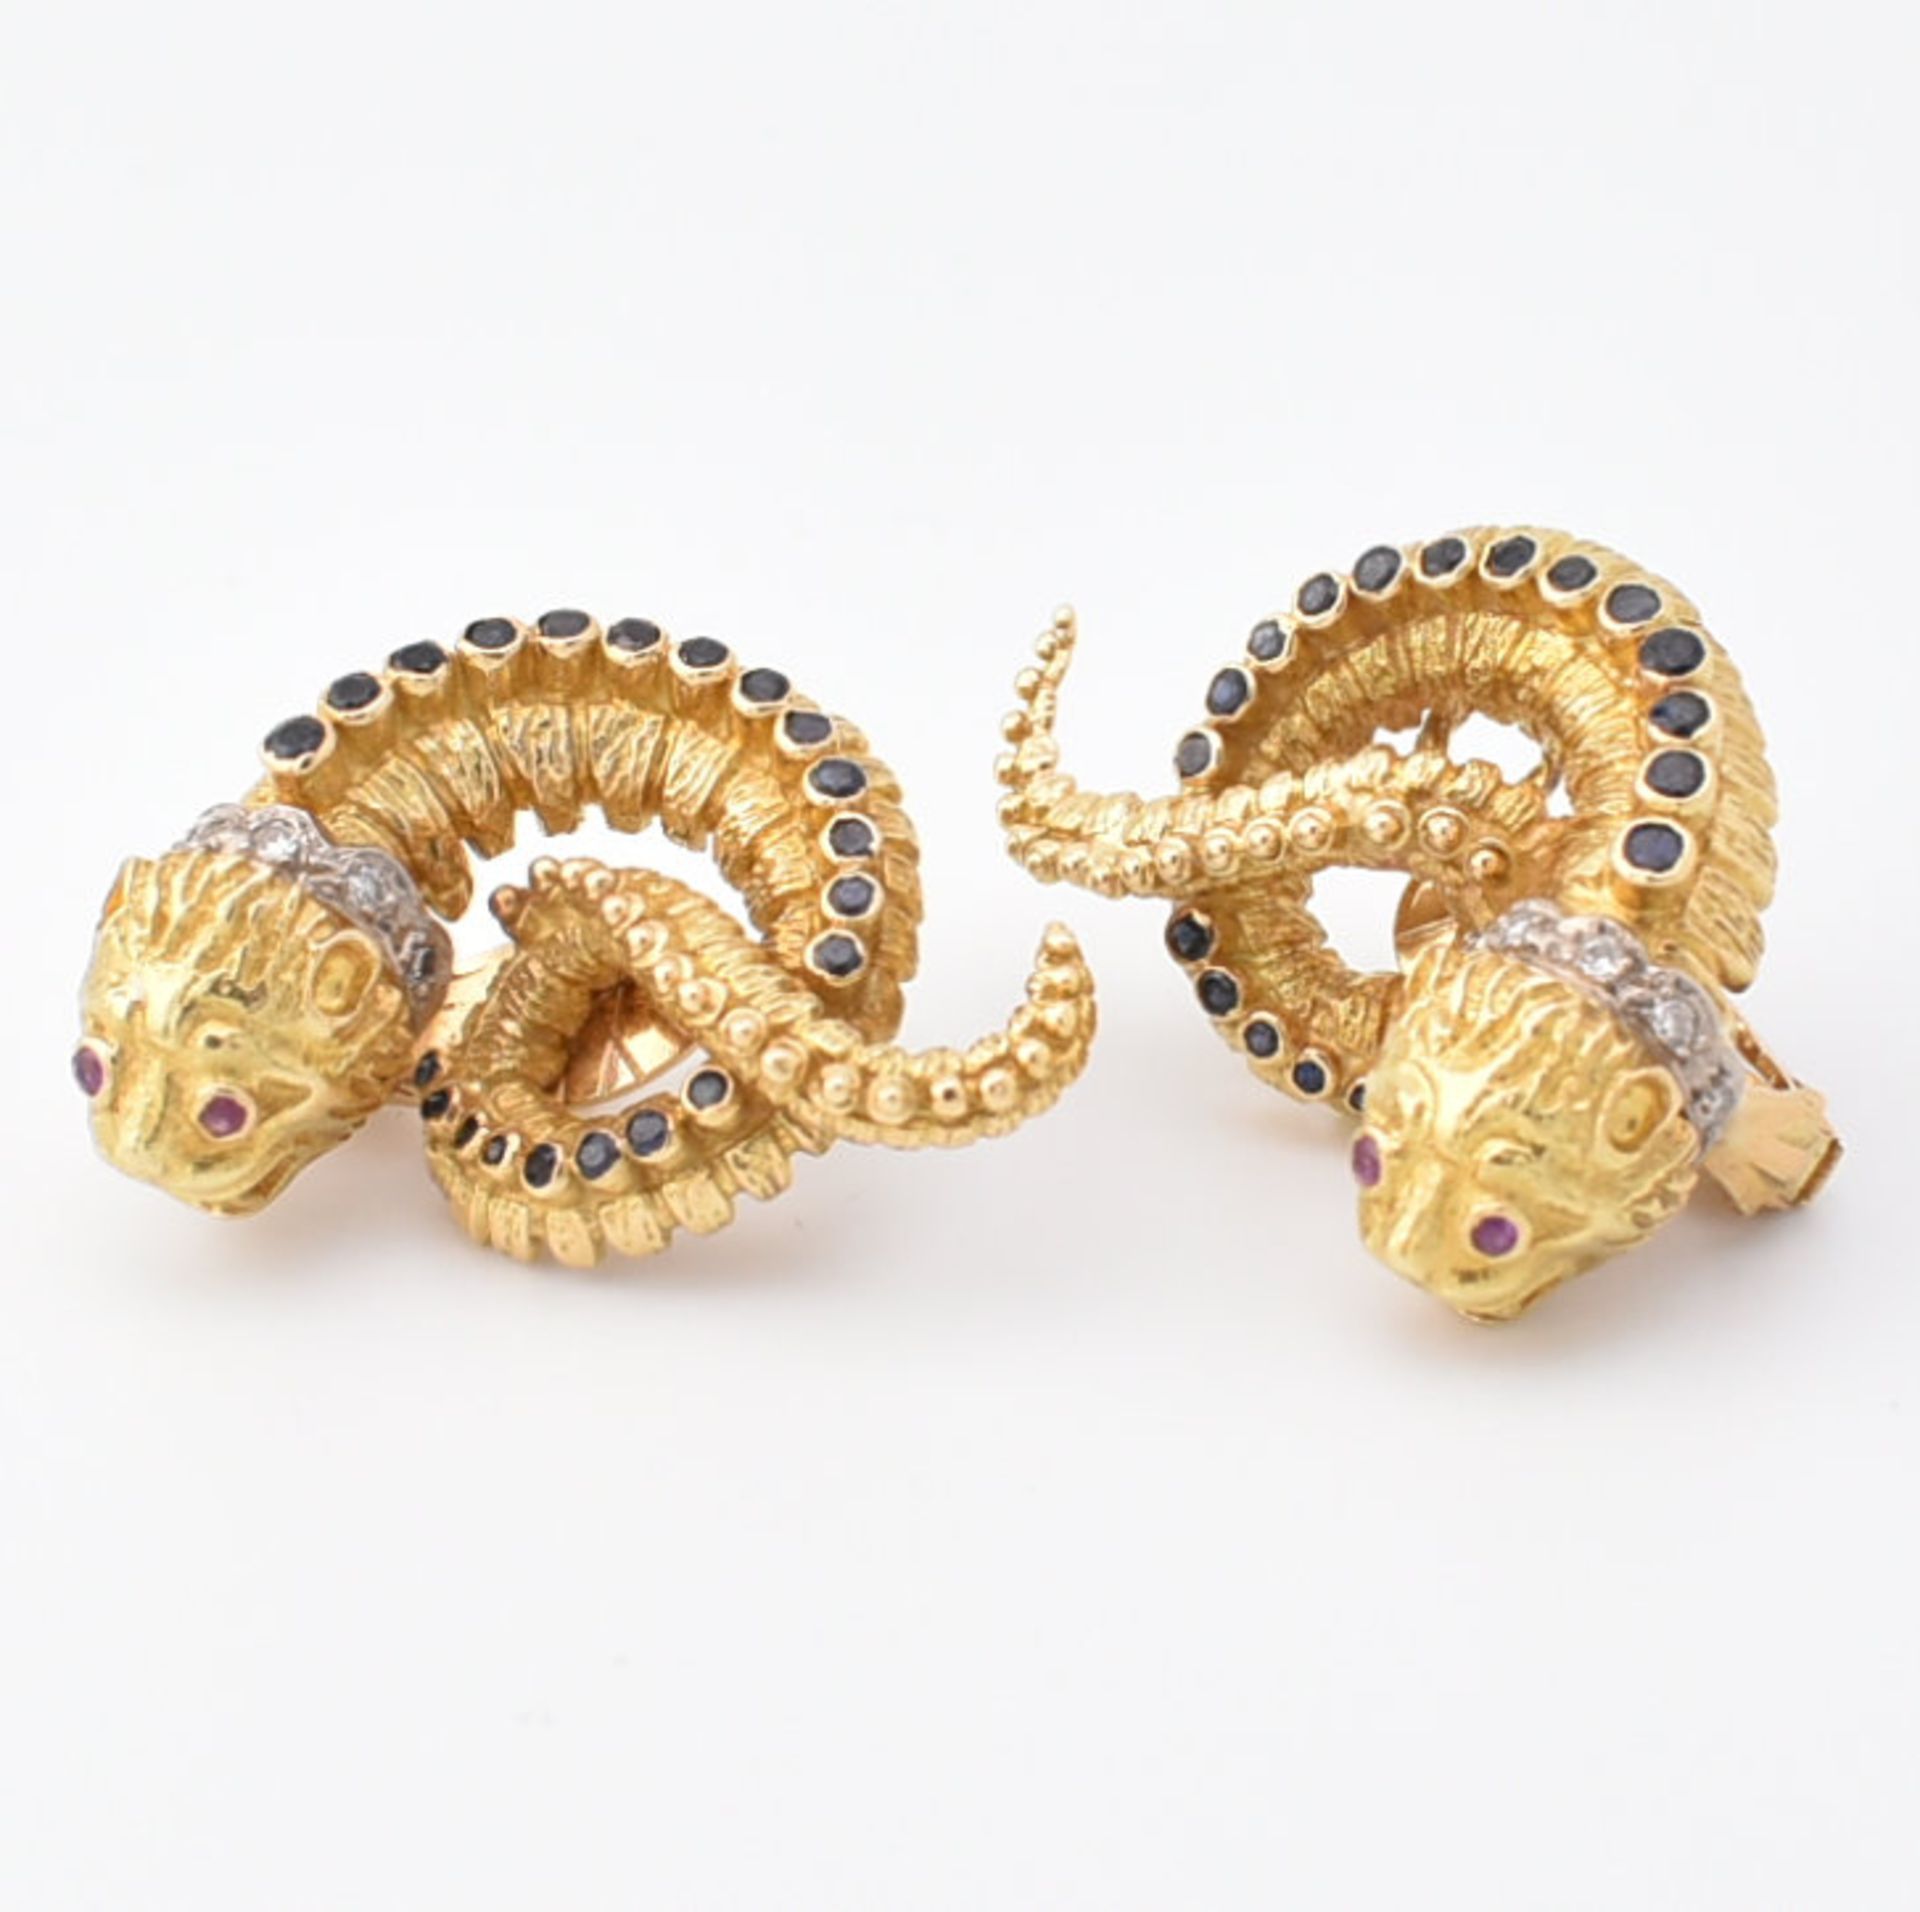 PAIR OF LALAOUNIS 18CT GOLD STONE SET CHIMERA EARRINGS - Image 12 of 13